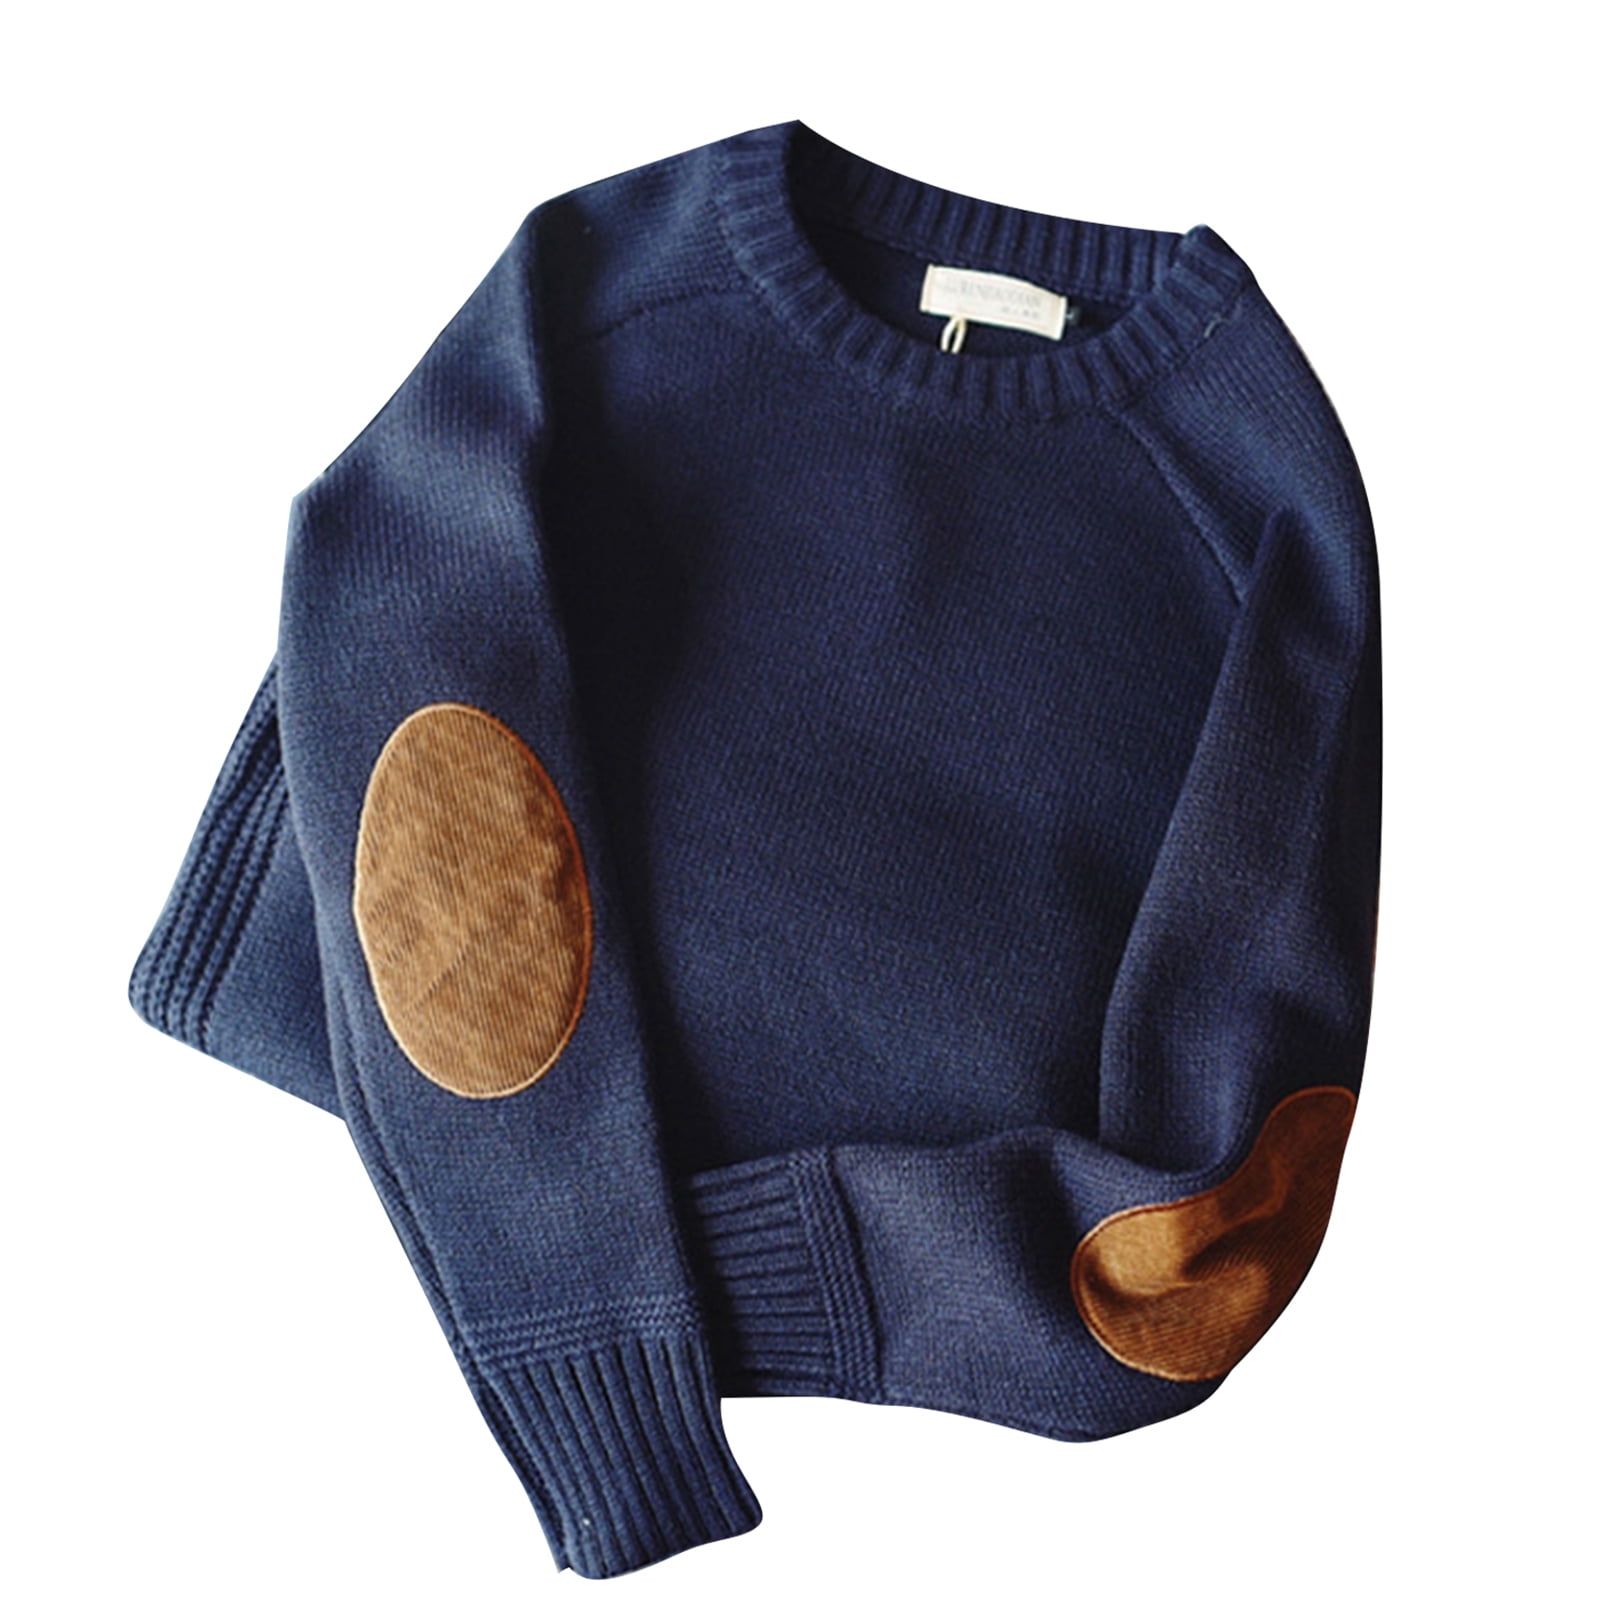  Men's Sweater Elbow Patches